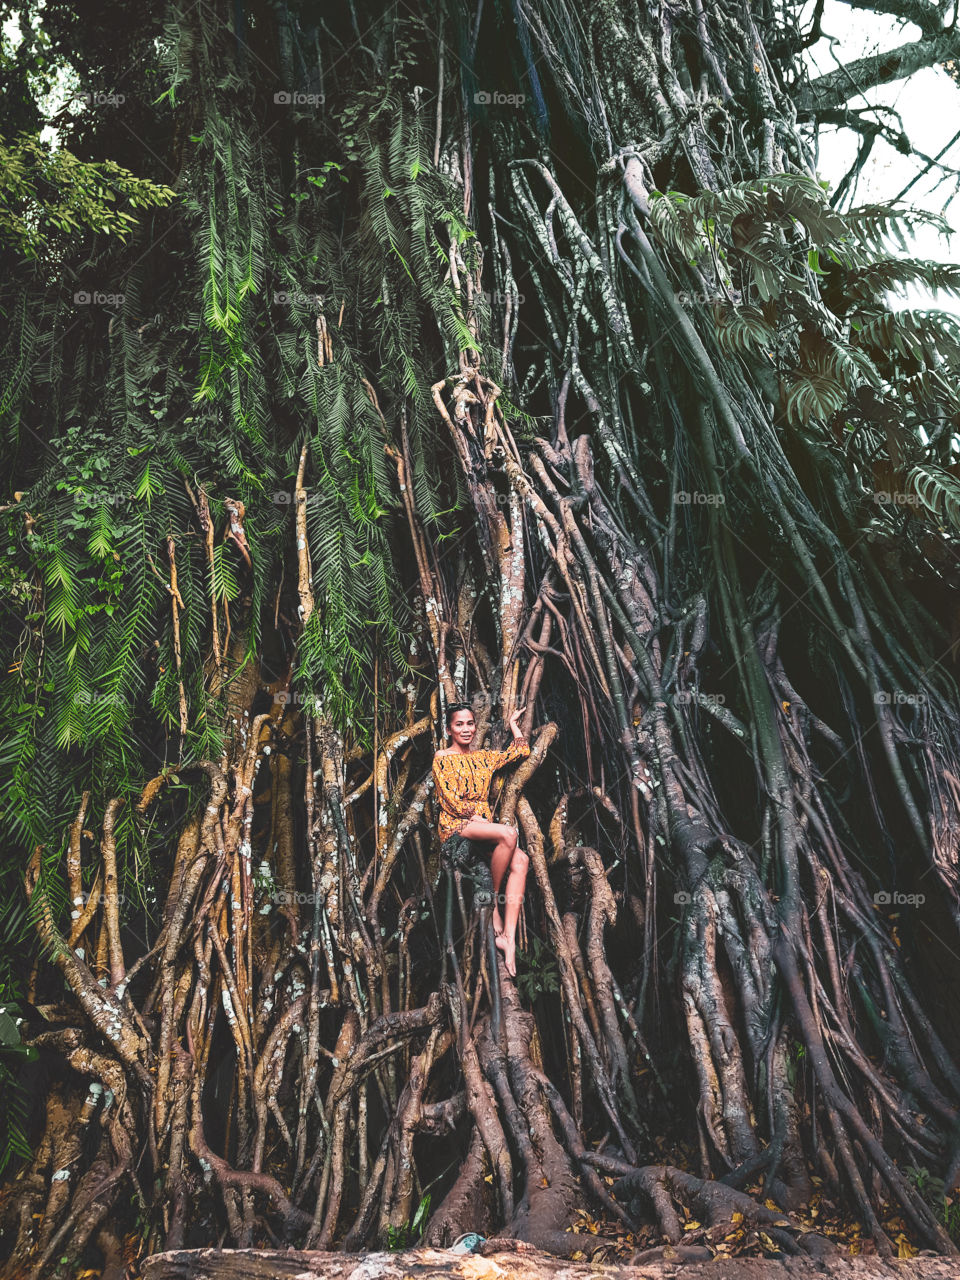 This is Mellennium Balete tree. This was my second time visiting it and I can say I'm still in awe and thankful to witness how this tree survived for 600 years.